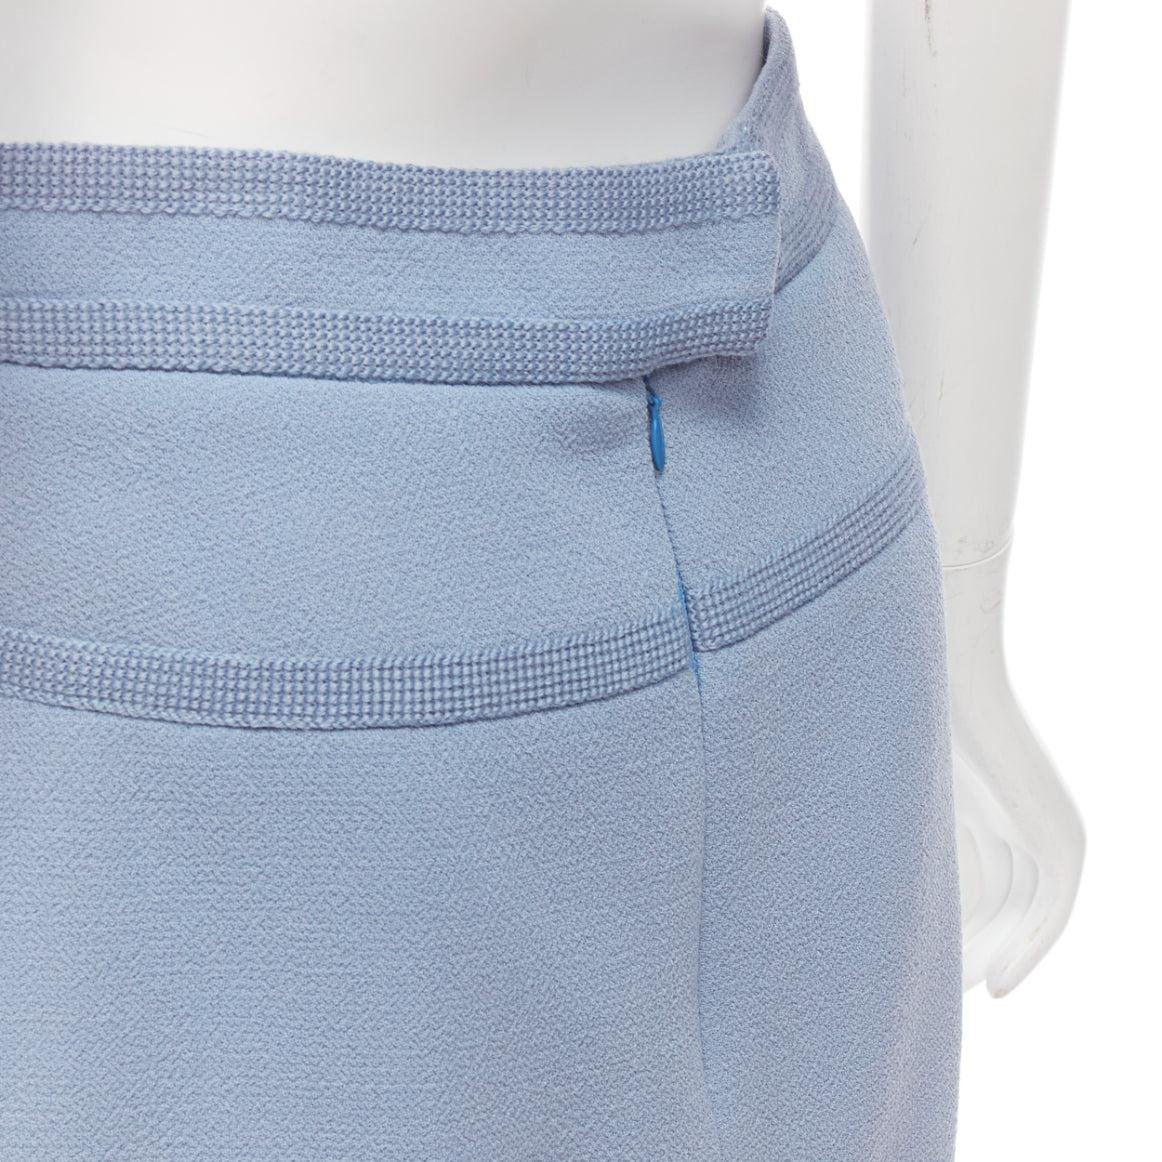 CHANEL Collection28 powder blue 100% wool silk lined trimmed mini skirt FR38 M
Reference: CNLE/A00258
Brand: Chanel
Collection: Collection28
Material: Wool
Color: Blue
Pattern: Solid
Closure: Zip Fly
Lining: Blue Silk
Extra Details: Back zip. Lined